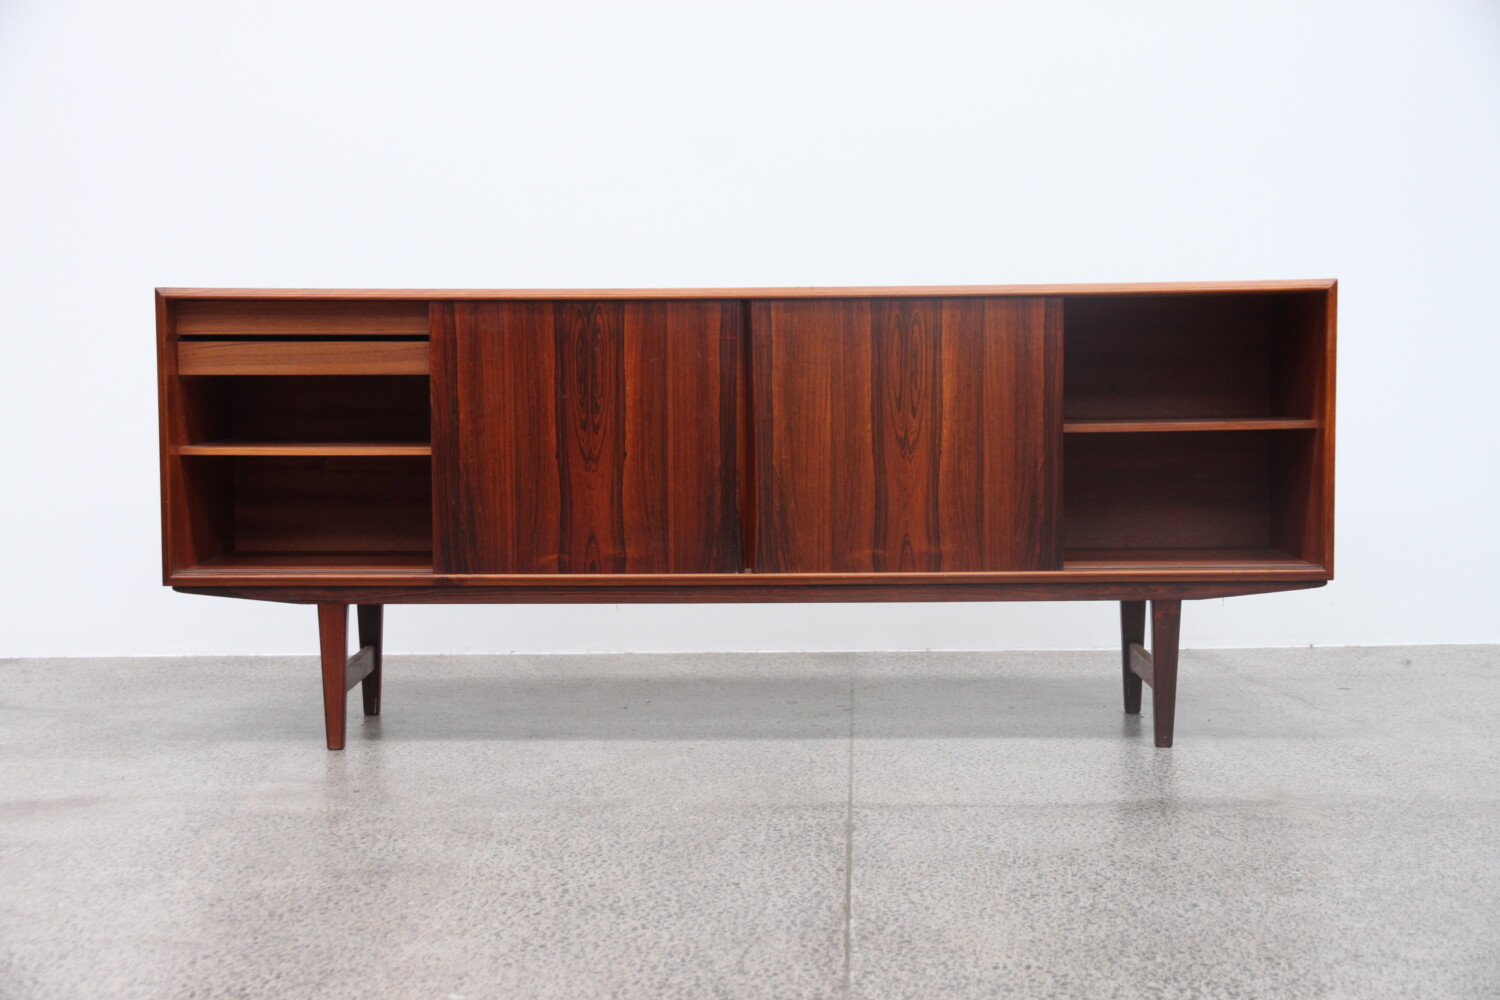 Rosewood Sideboard by E.W Bach sold